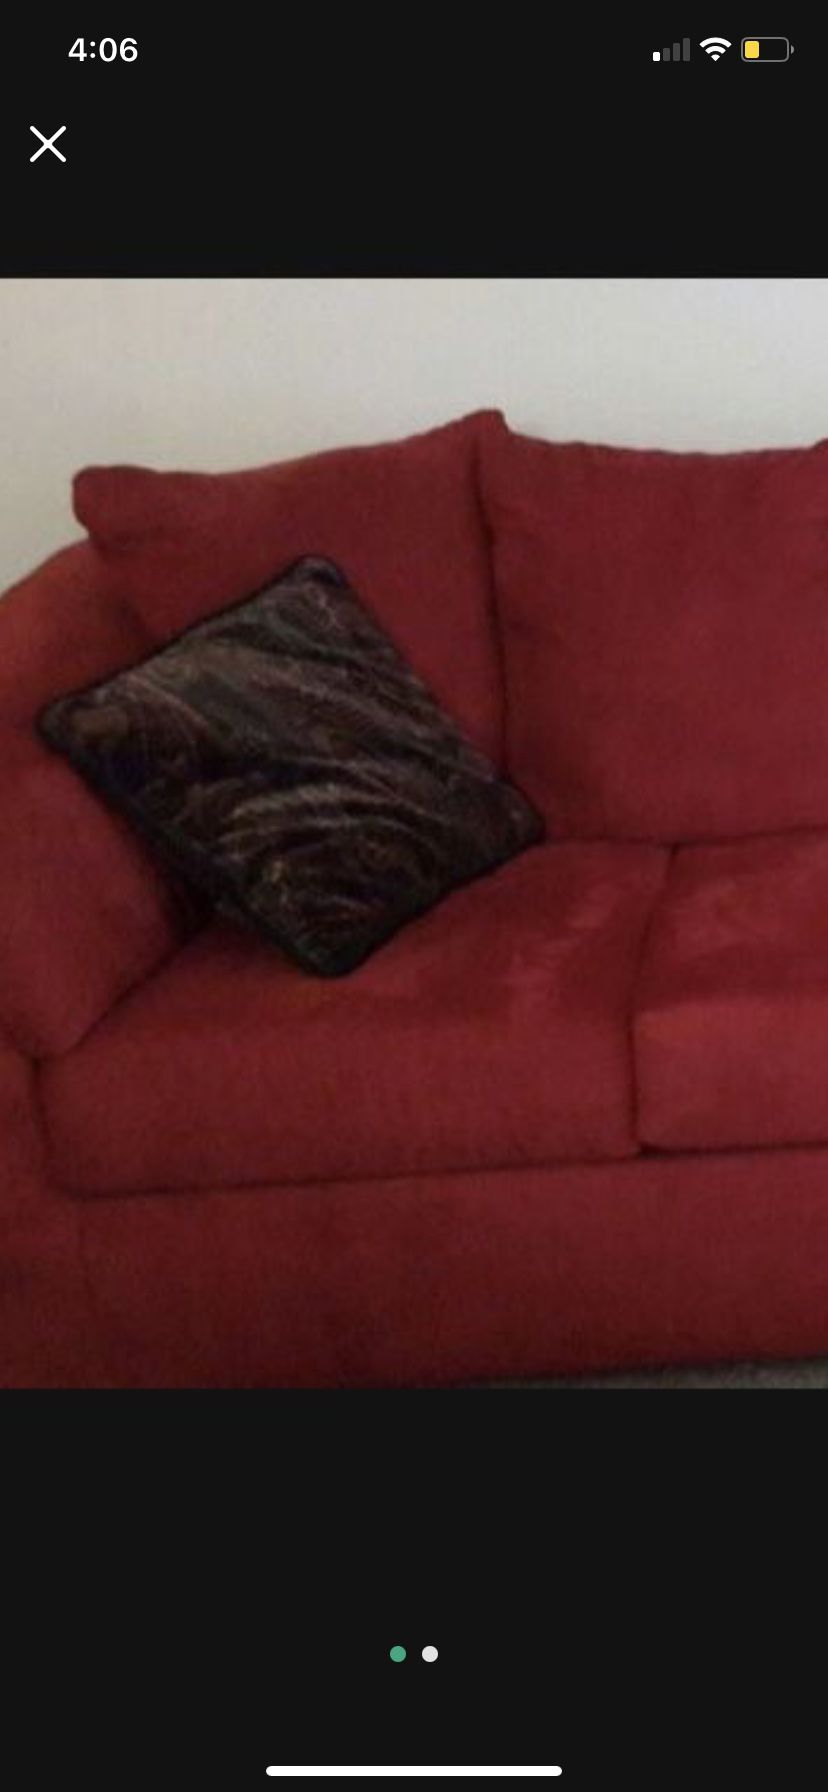 Living Room Set  With Three Seats In The Couch as Love Seat  Looks Like New Almost New